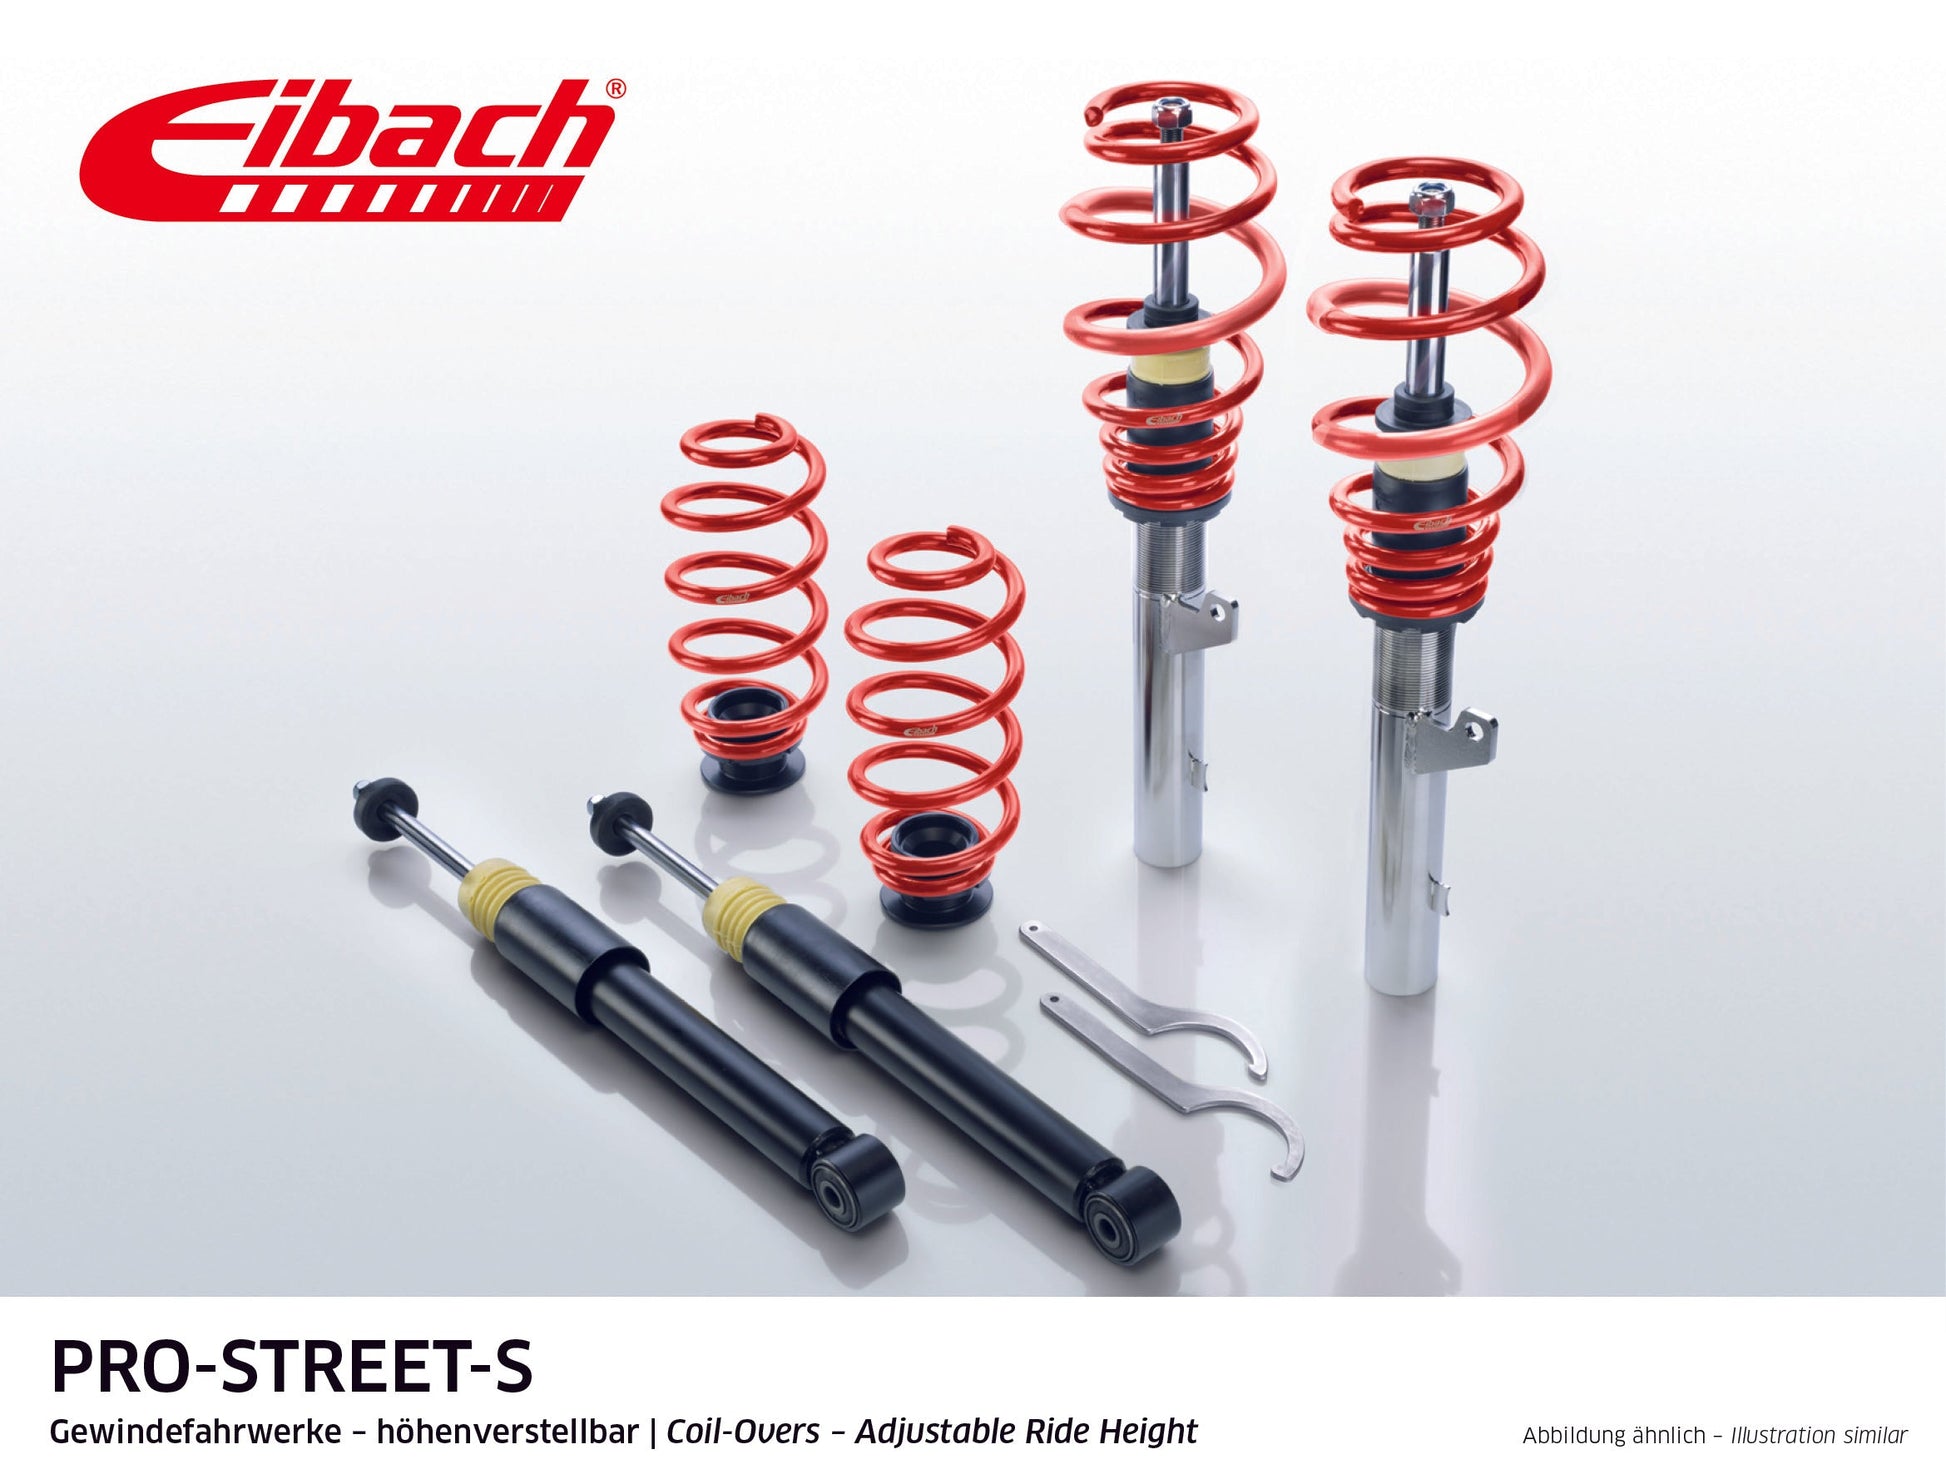 Eibach Pro-Street Coilover (PSS65-85-001-04-22) at £1154.55